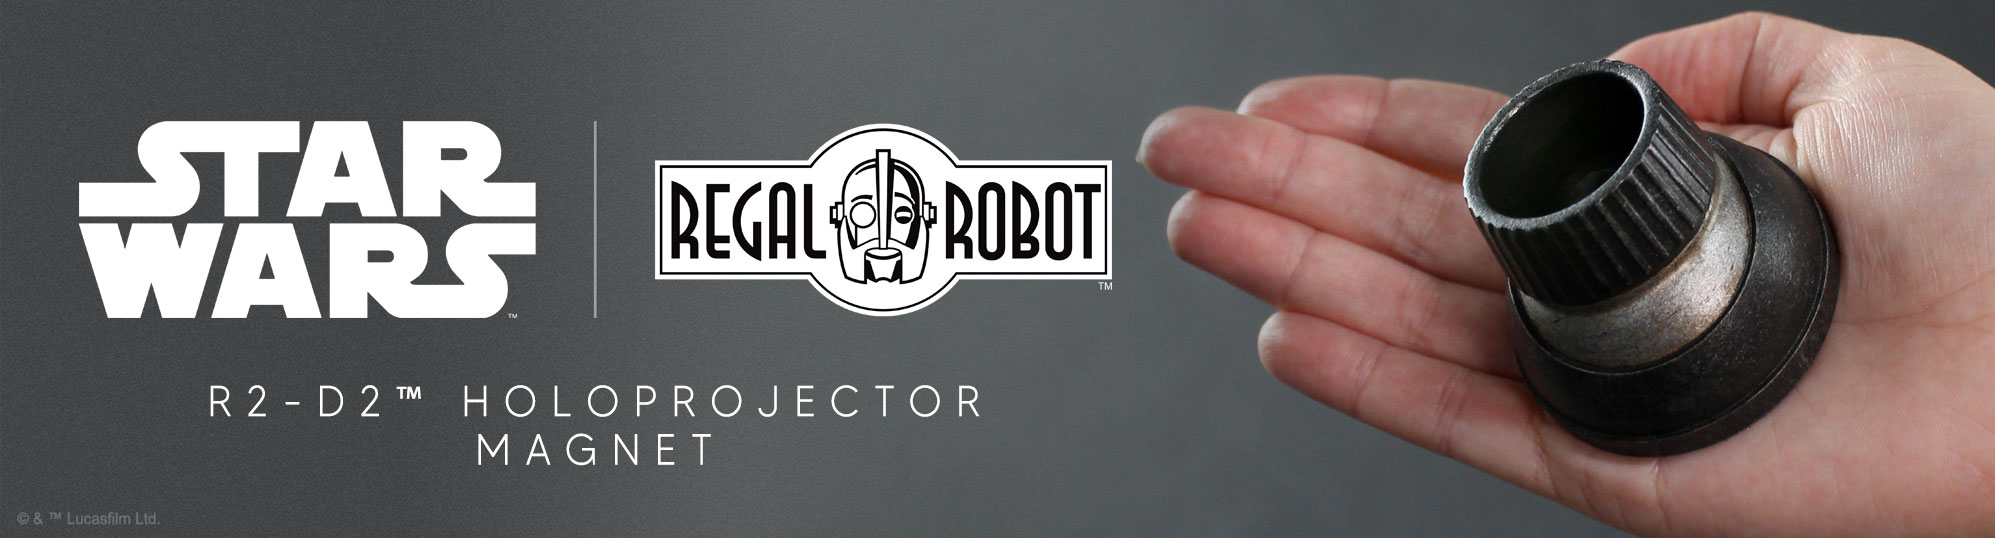 R2-D2 holoprojector as a collectible magnet